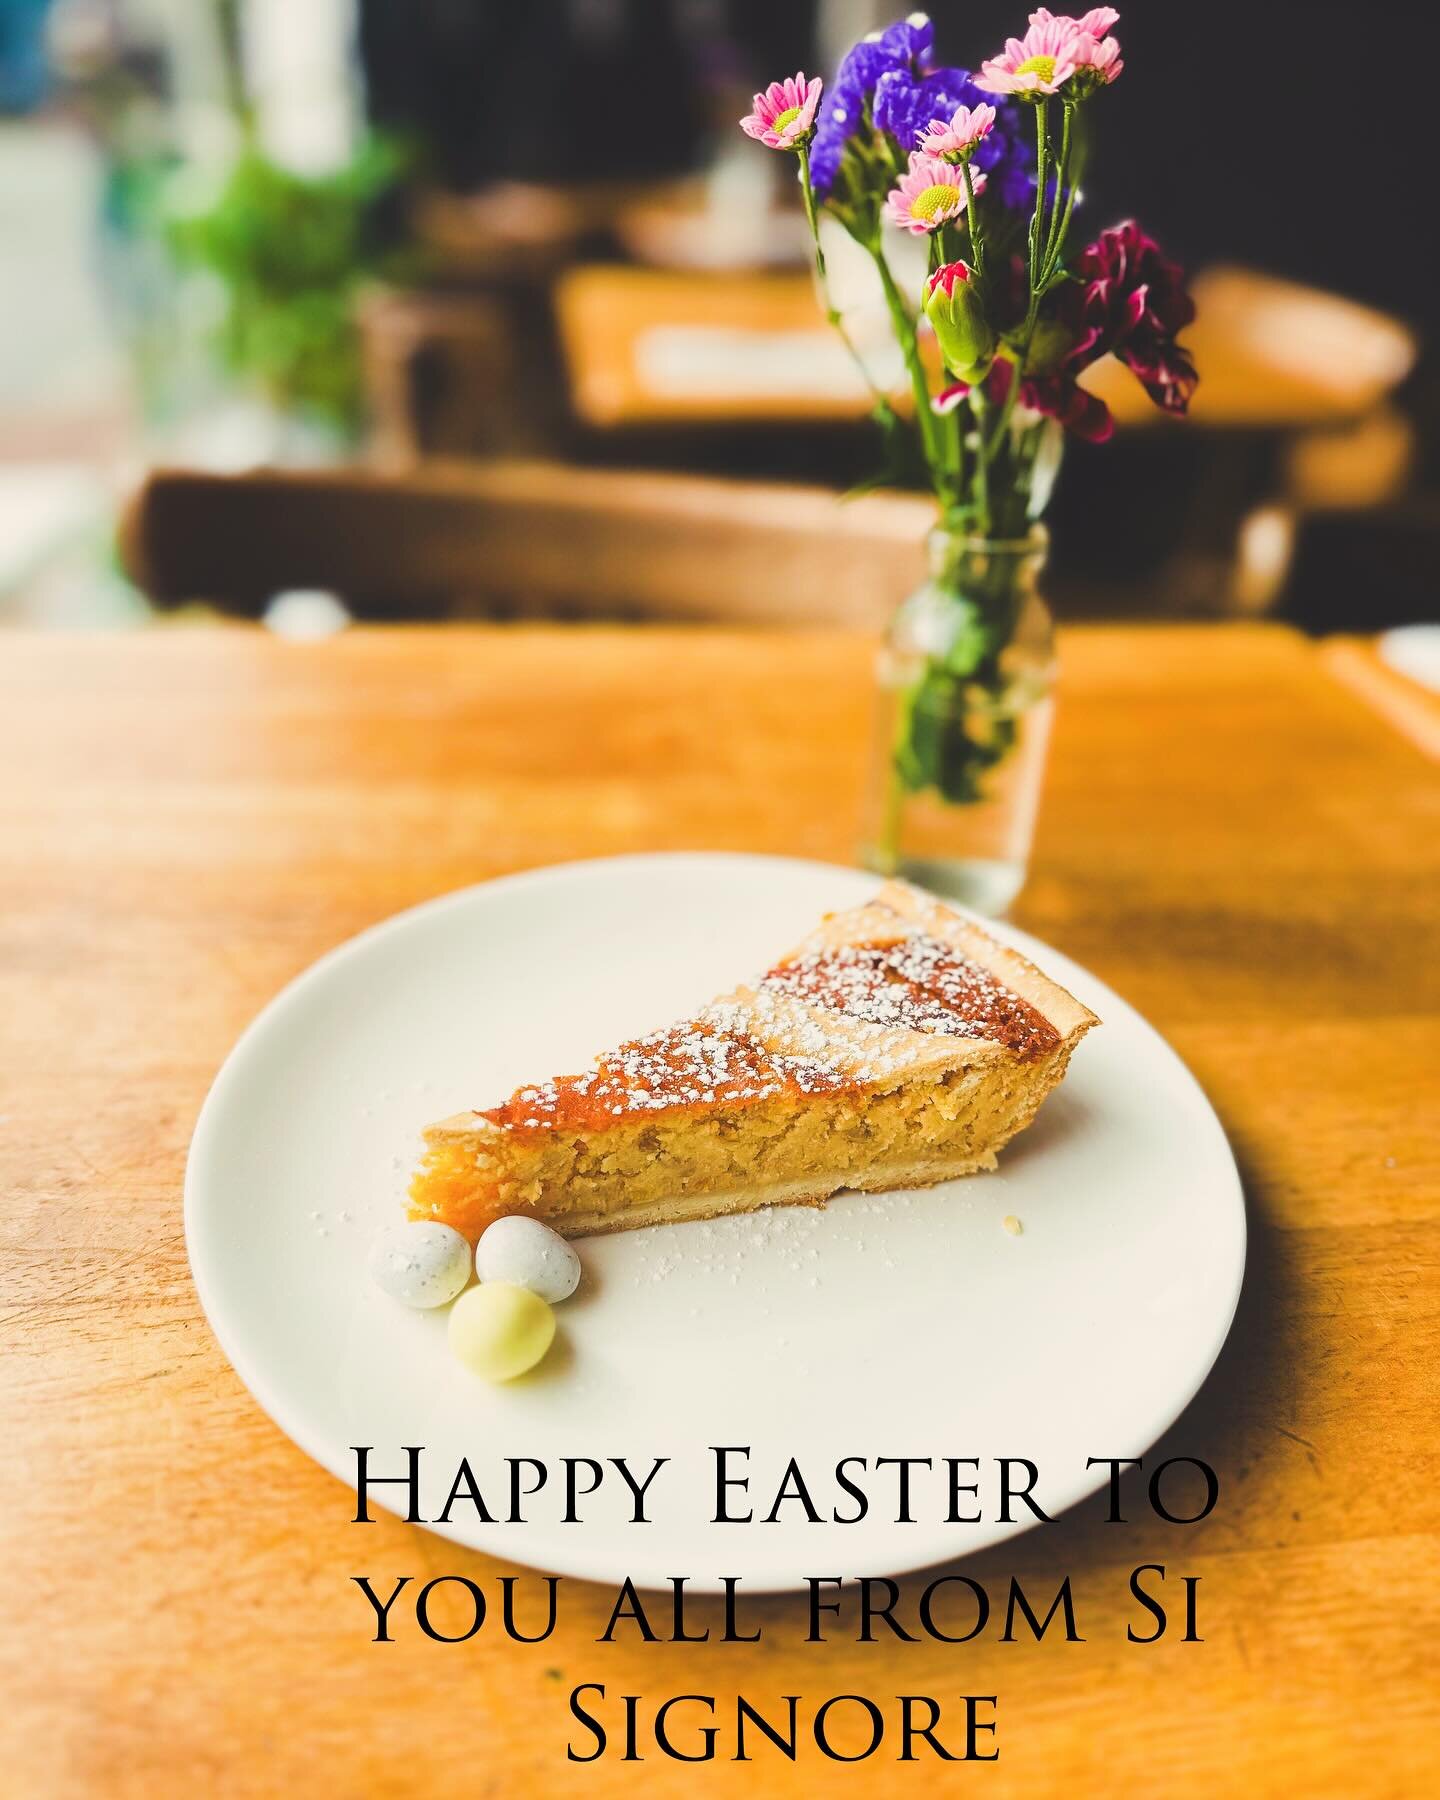 Happy Easter to you all from us at Si Signore ✨💛🐥Let&rsquo;s celebrate the joy of the season together with traditional Italian dishes, wine and Italian traditional desserts to give an Italian touch to the magic of Easter. Buona Pasqua a tutti! 🍝🍷